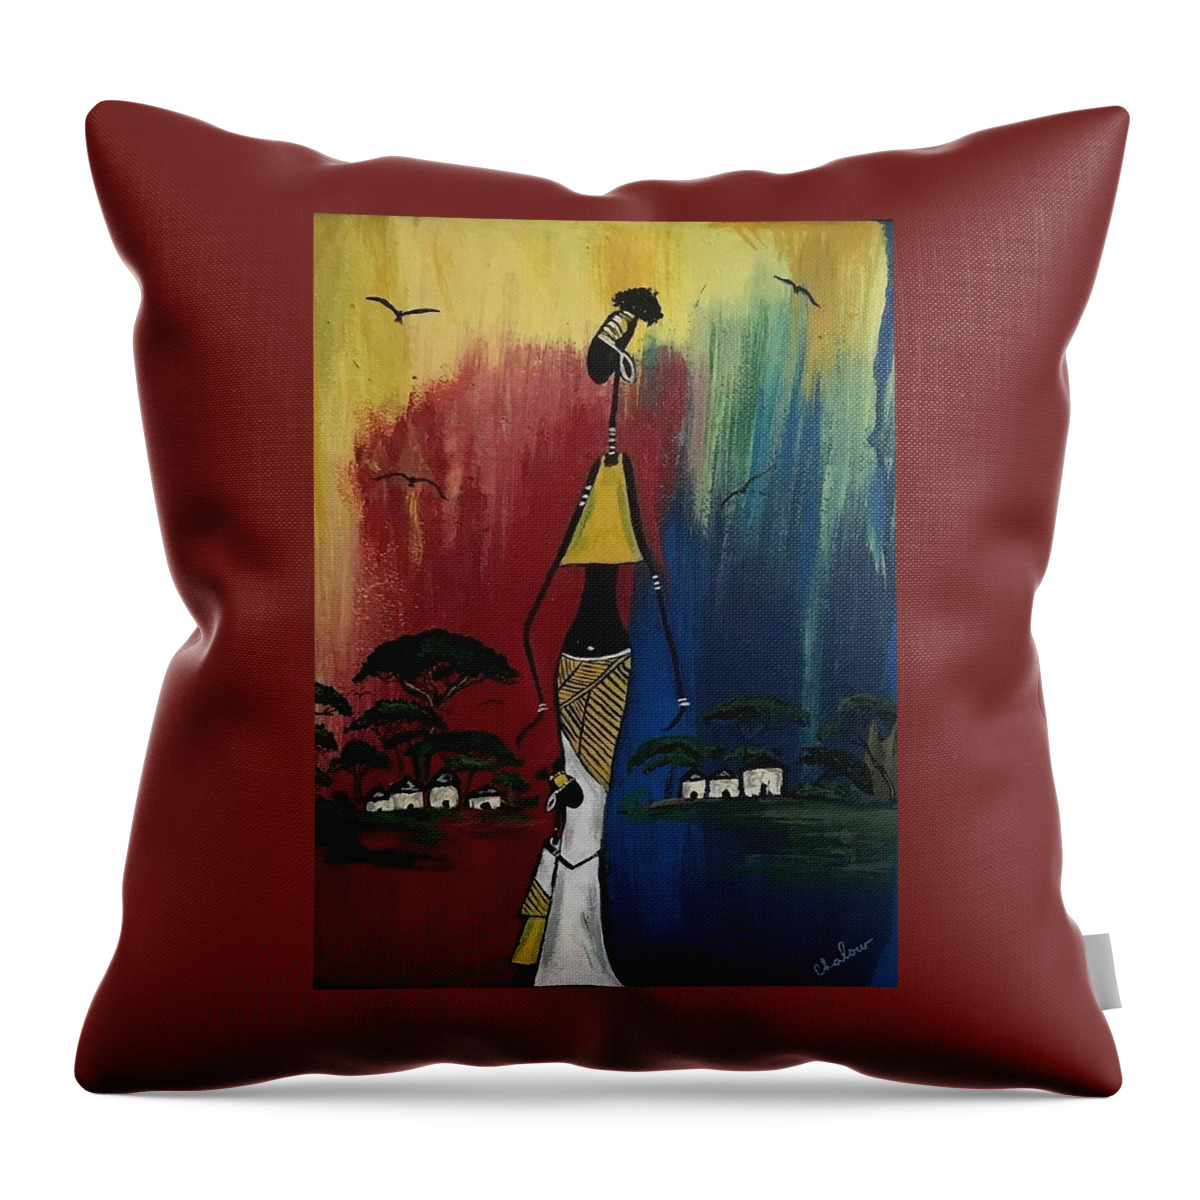  Throw Pillow featuring the painting Oh My Child by Charles Young